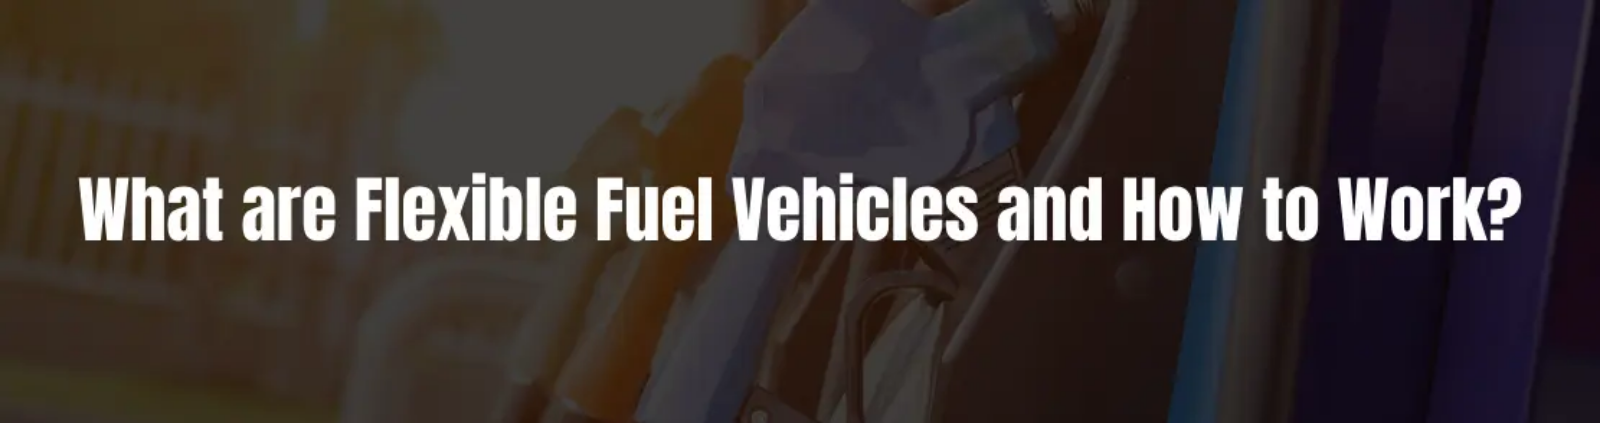 What are flexible fuel vehicles and how to work?